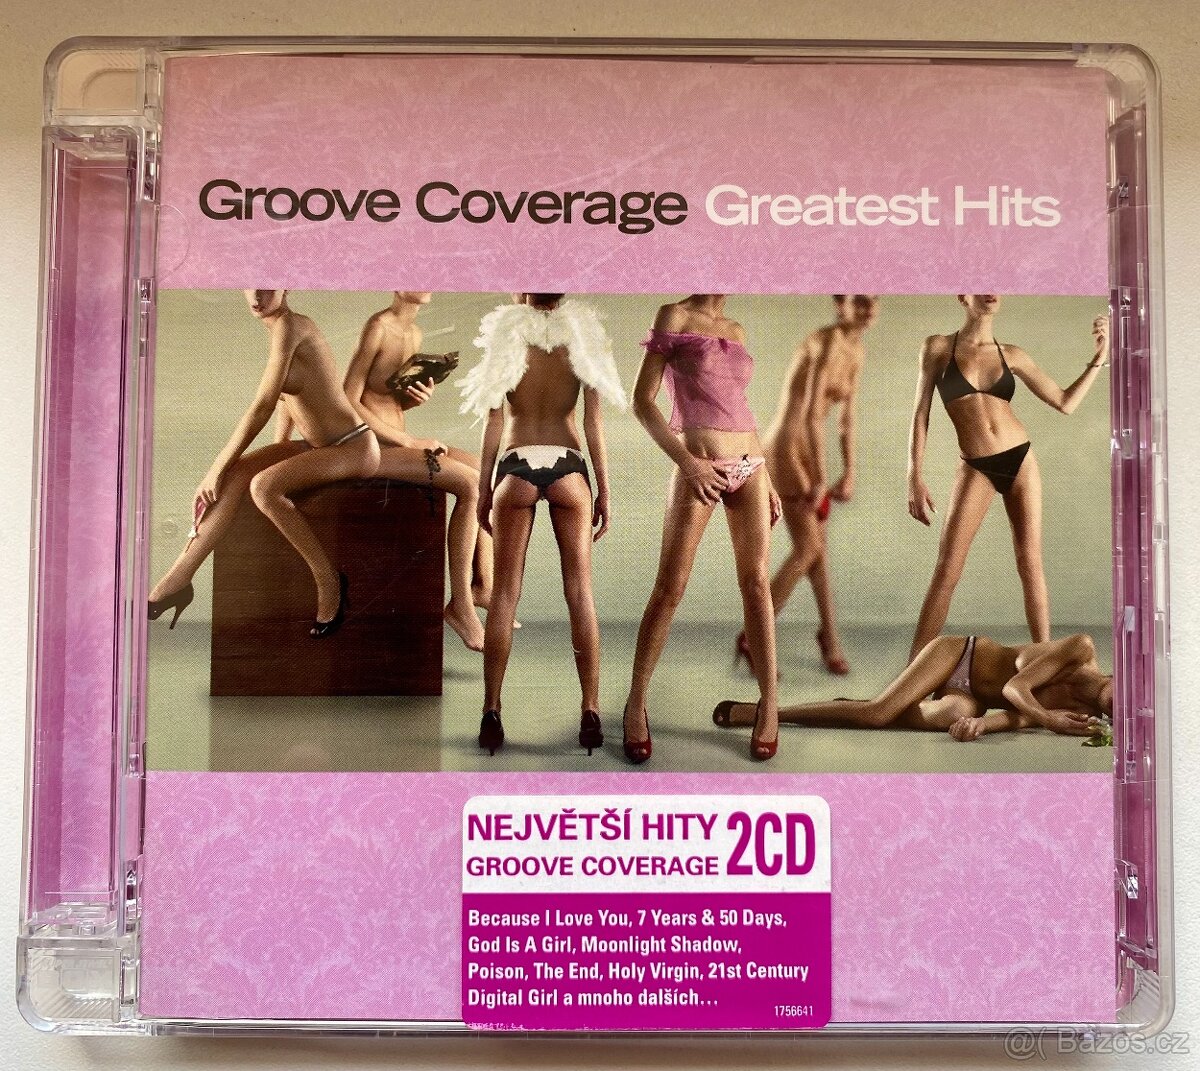 2CD GROOVE COVERAGE - GREATEST HITS